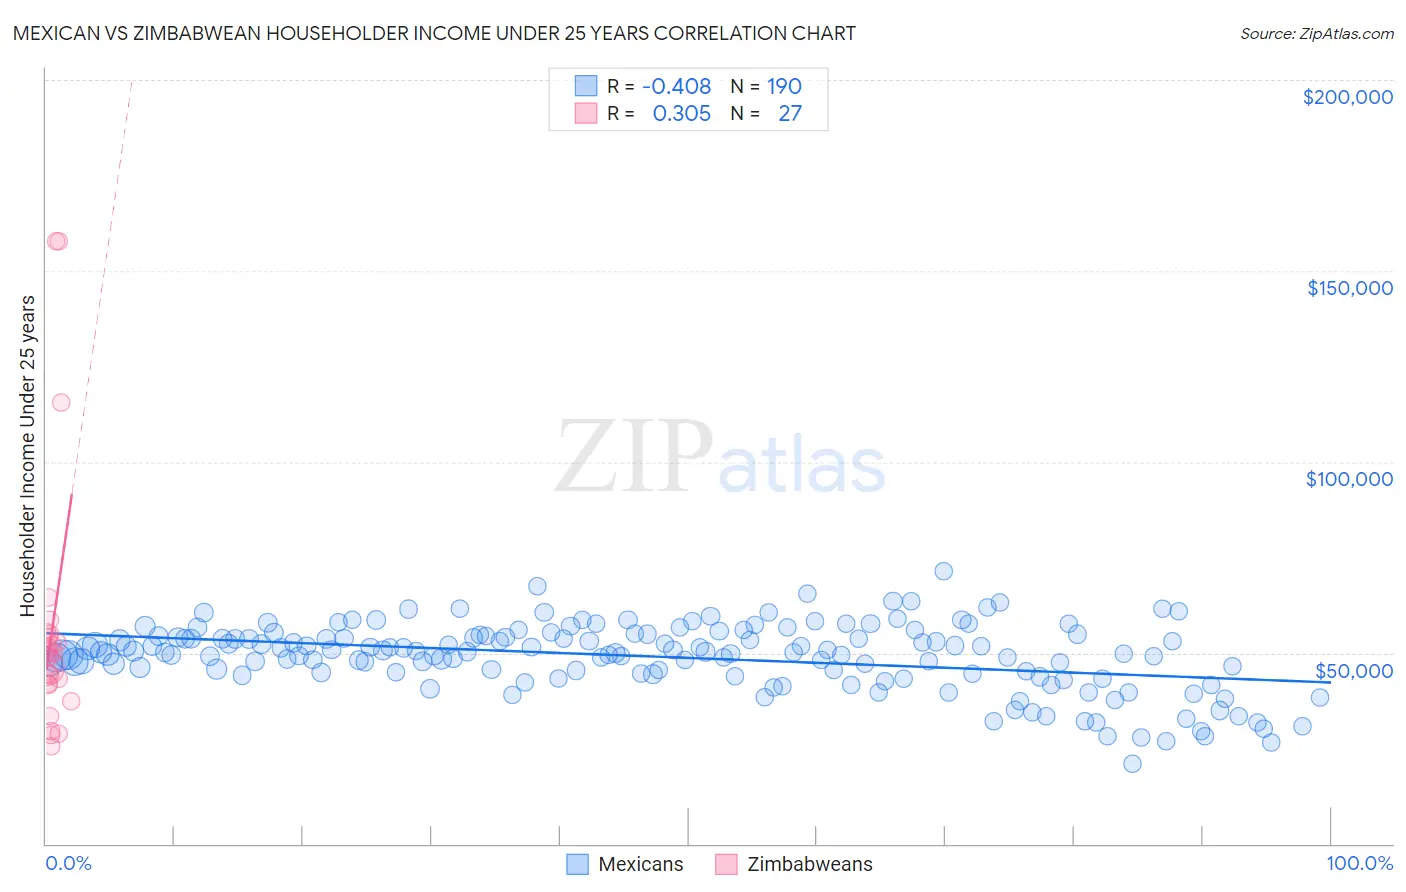 Mexican vs Zimbabwean Householder Income Under 25 years